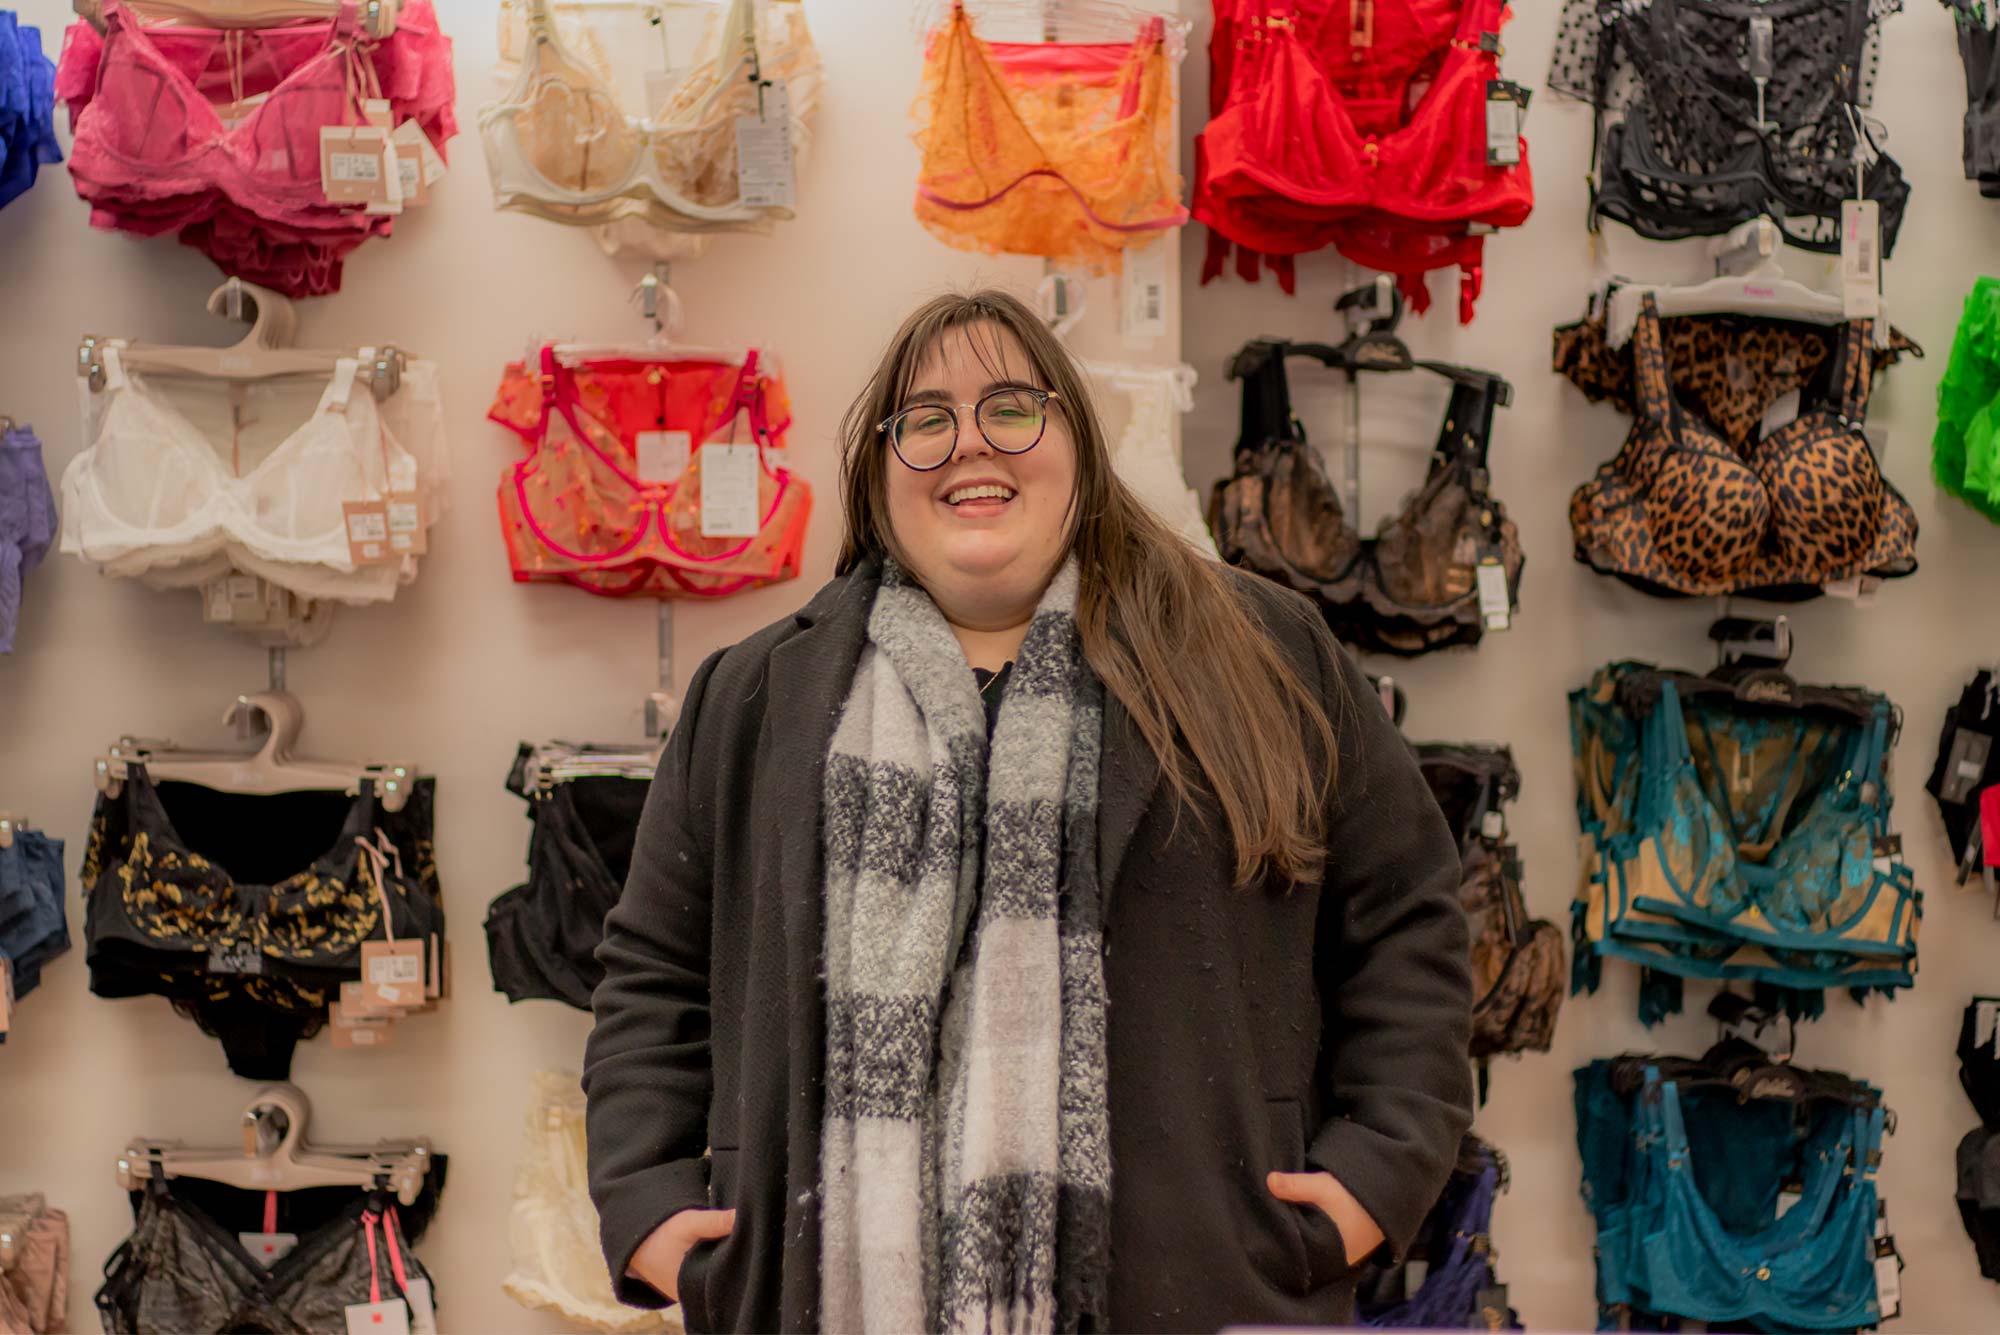 Bra fitter Katherine in front of a wall of bras